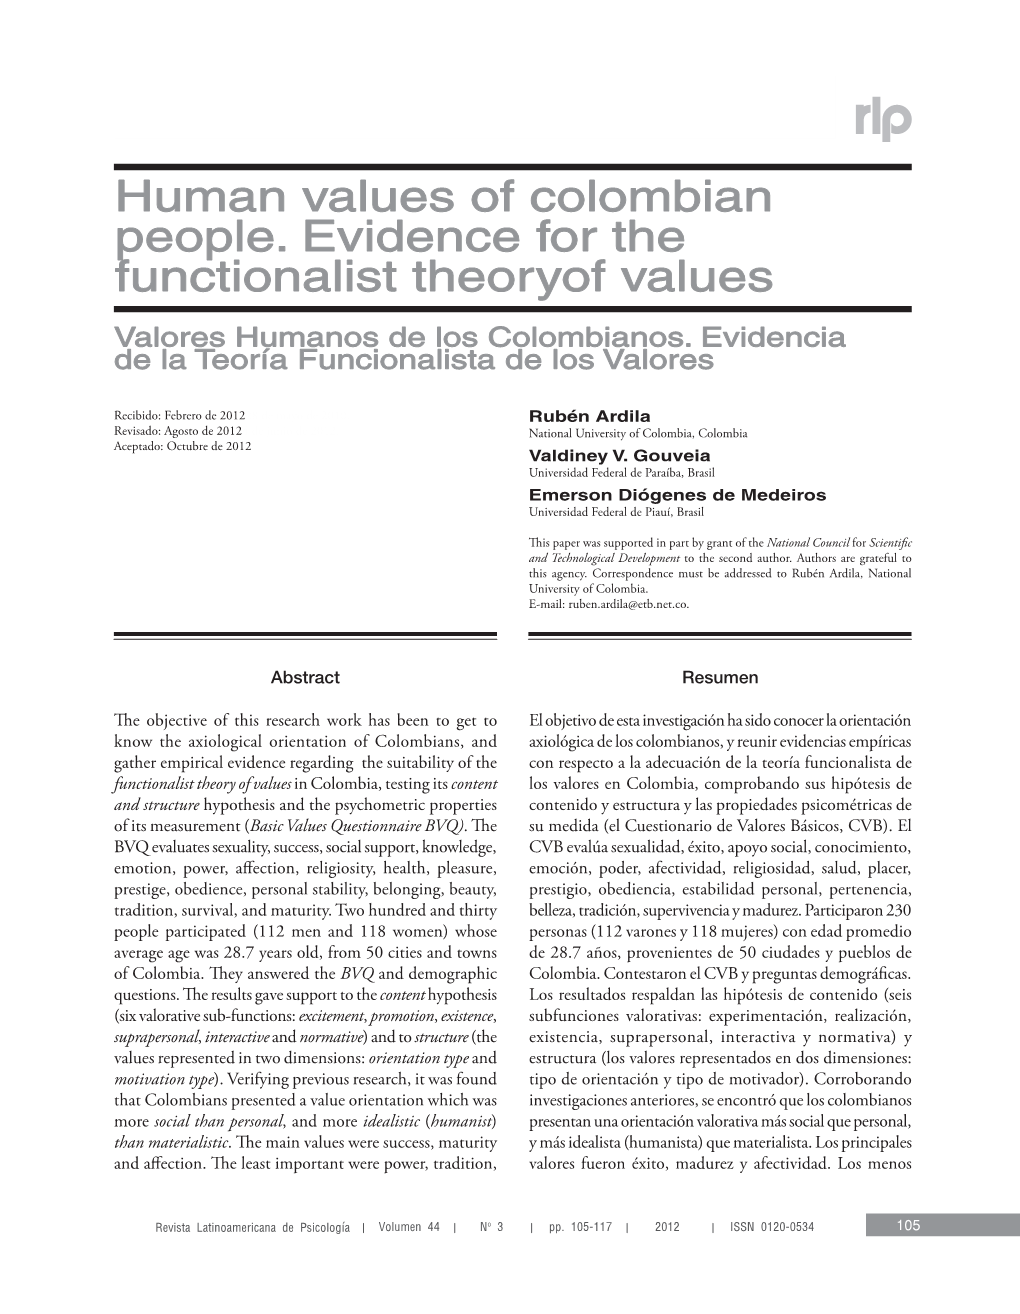 Human Values of Colombian People. Evidence for the Functionalist Theory of Values